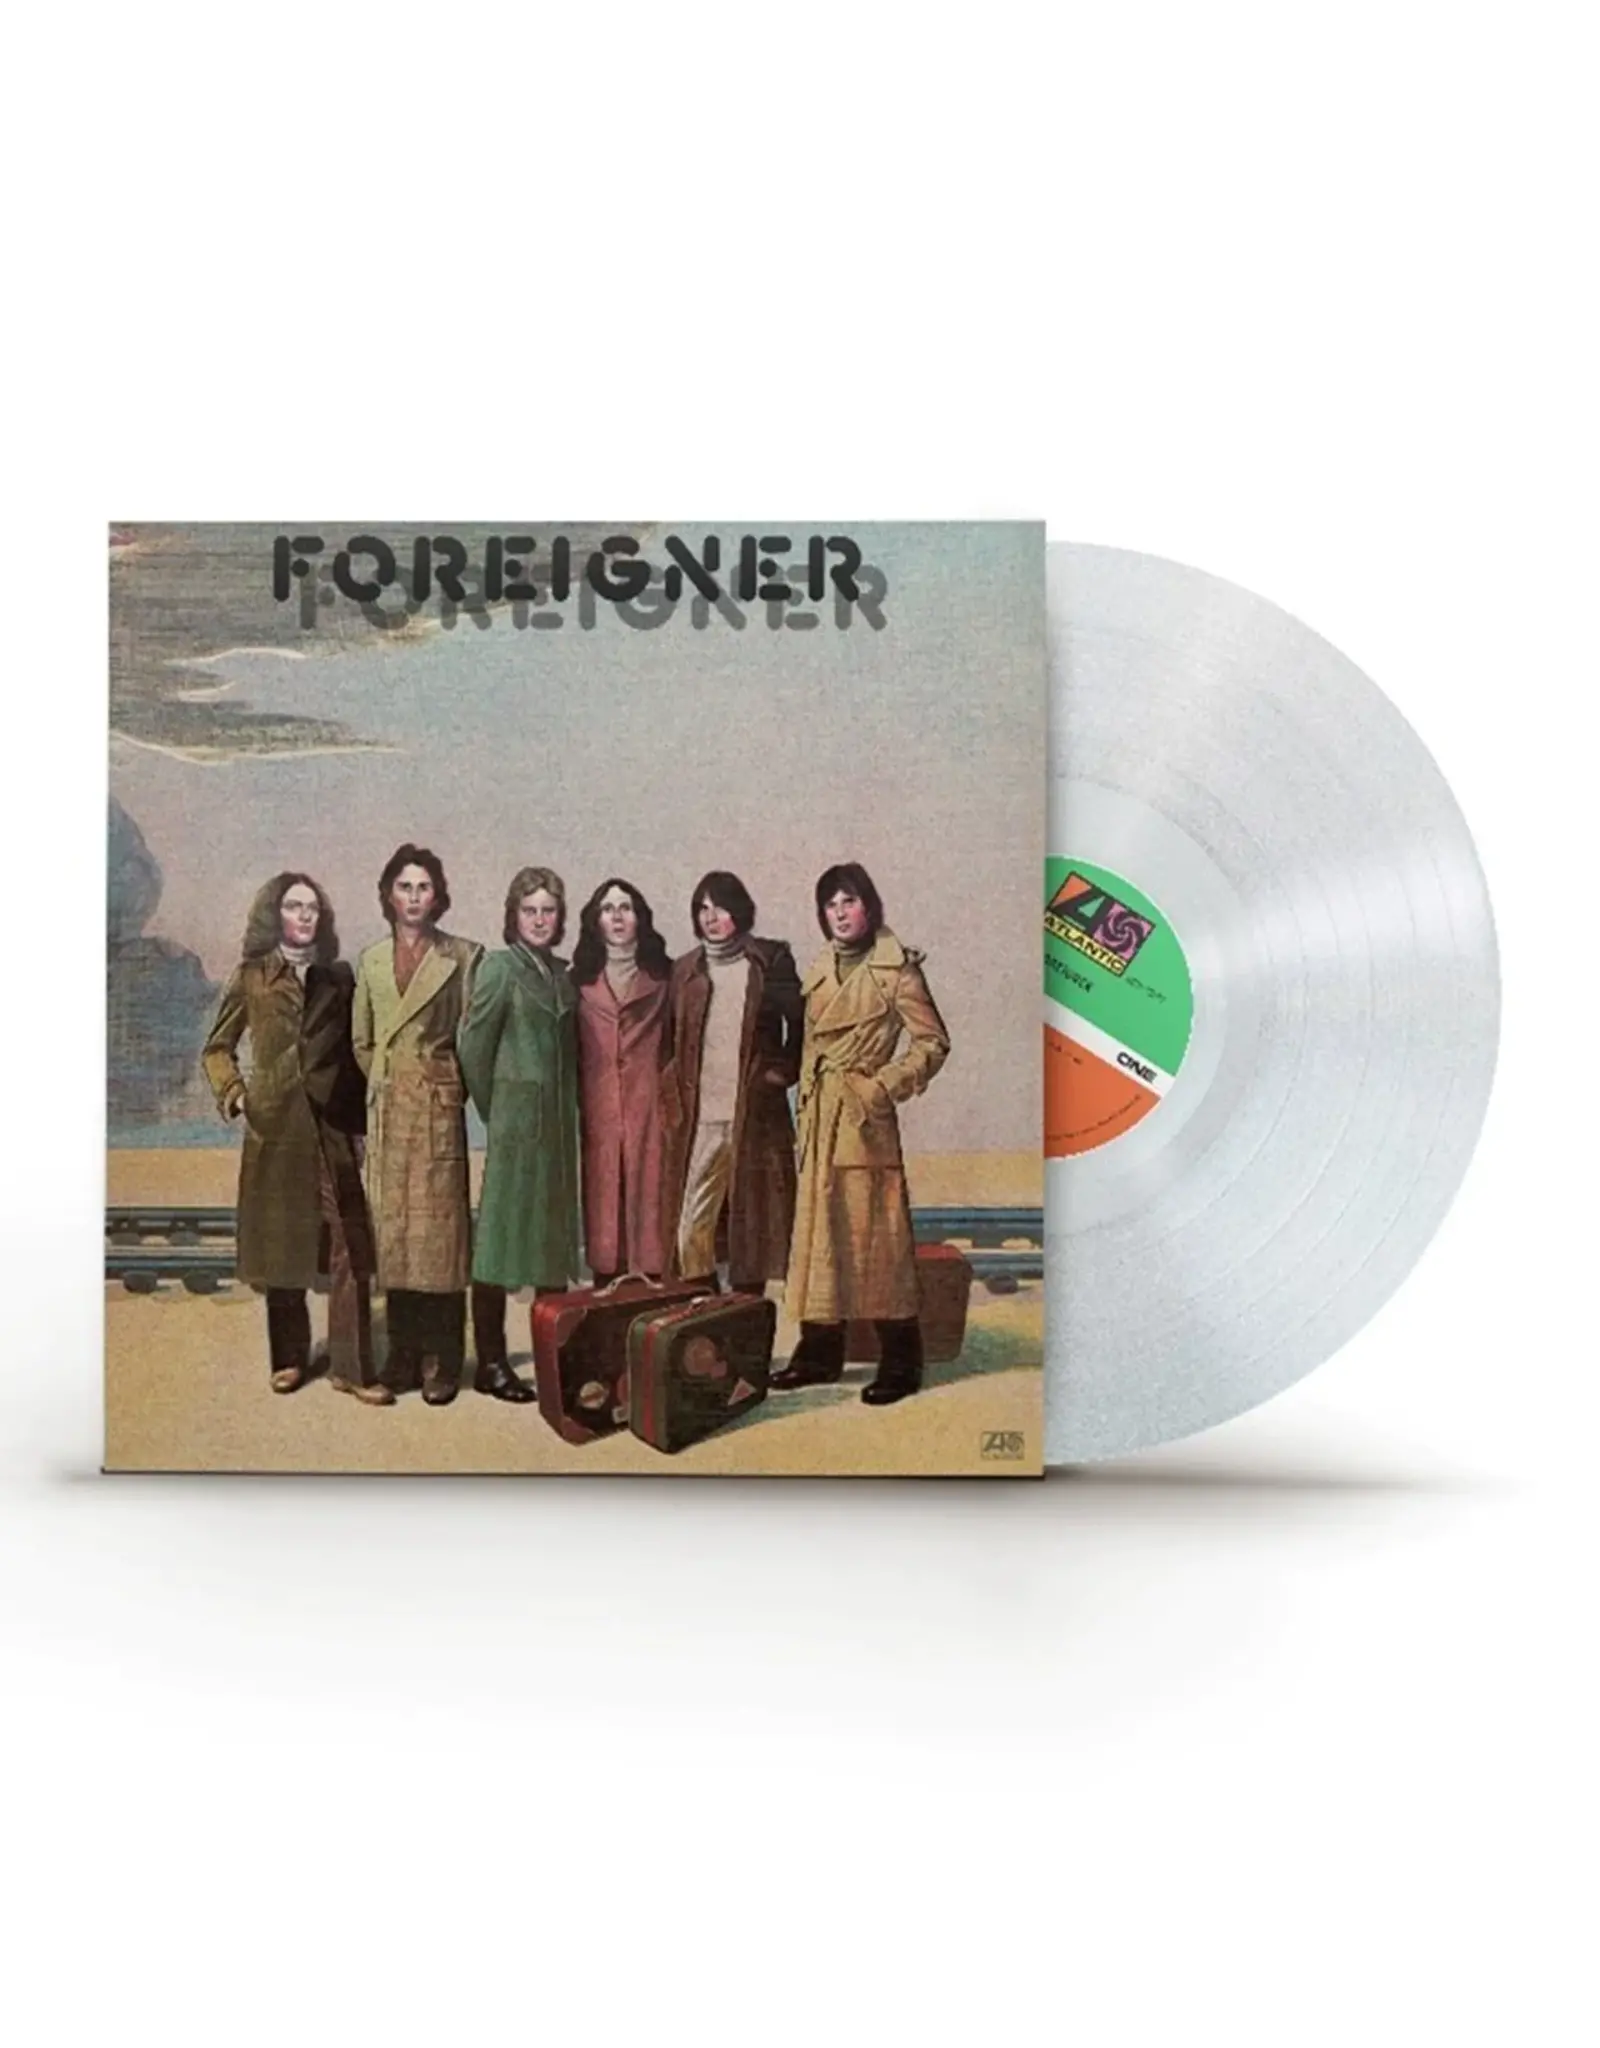 Foreigner - Foreigner (Exclusive Crystal Clear Vinyl)